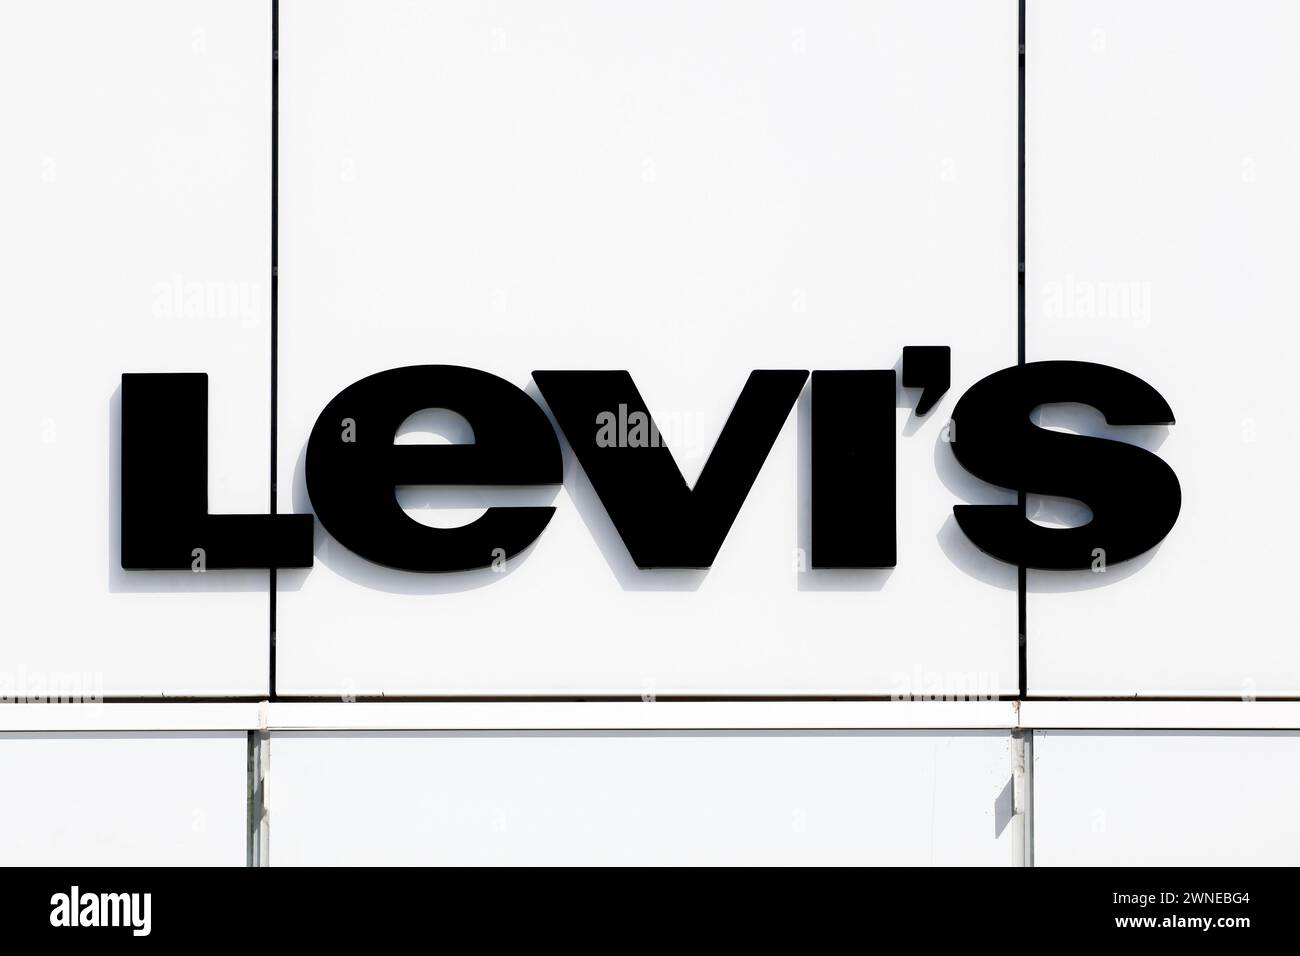 Villefontaine, France - September 13, 2019: Levi Strauss logo on a wall. Levi Strauss founded in 1853, is a privately held American clothing company Stock Photo